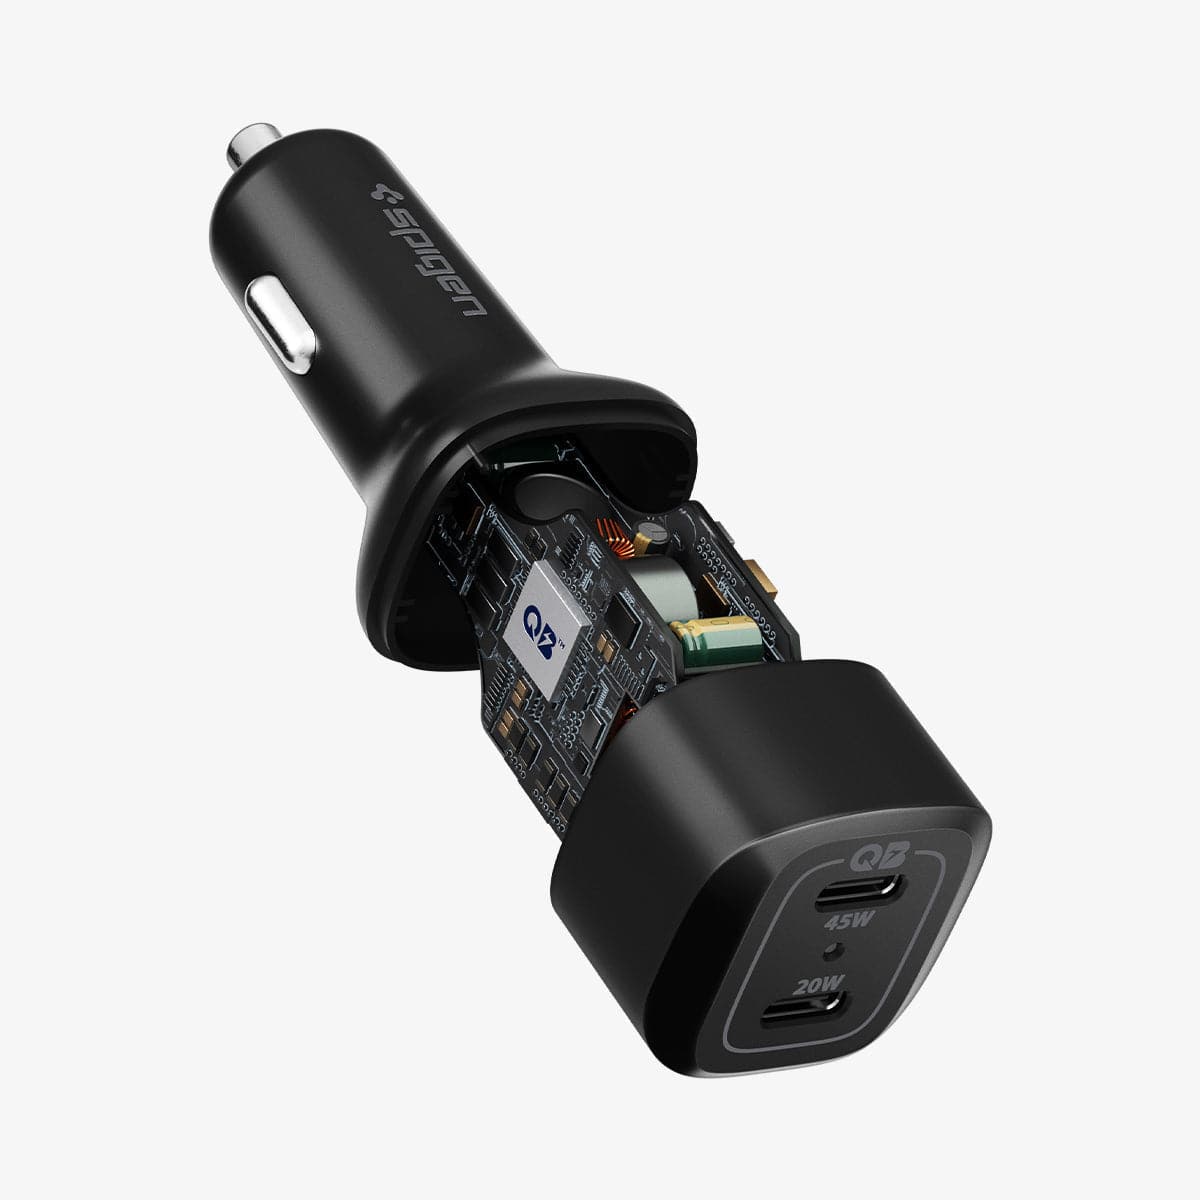 ACP02562 - ArcStation™ Car Charger PC2000 showing the inside technology component